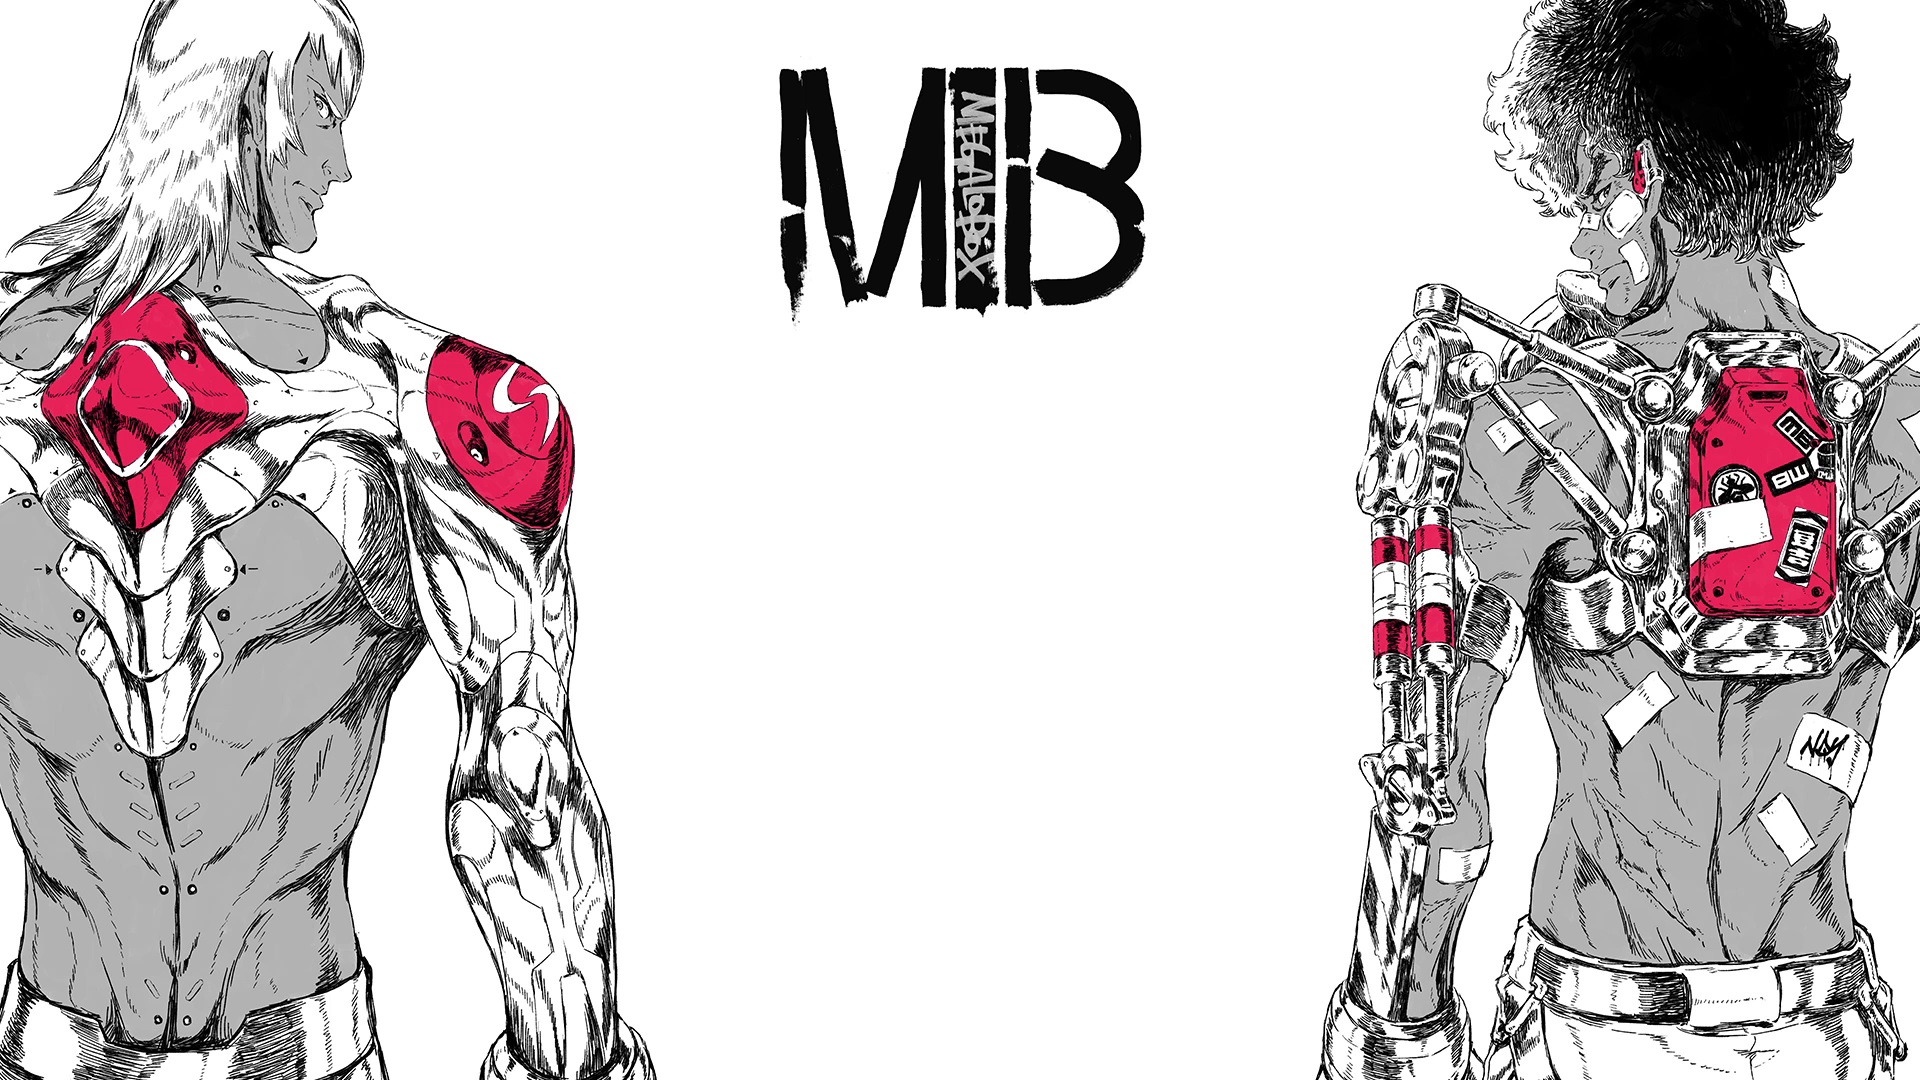 Anime Megalo Box HD Wallpaper | Background Image